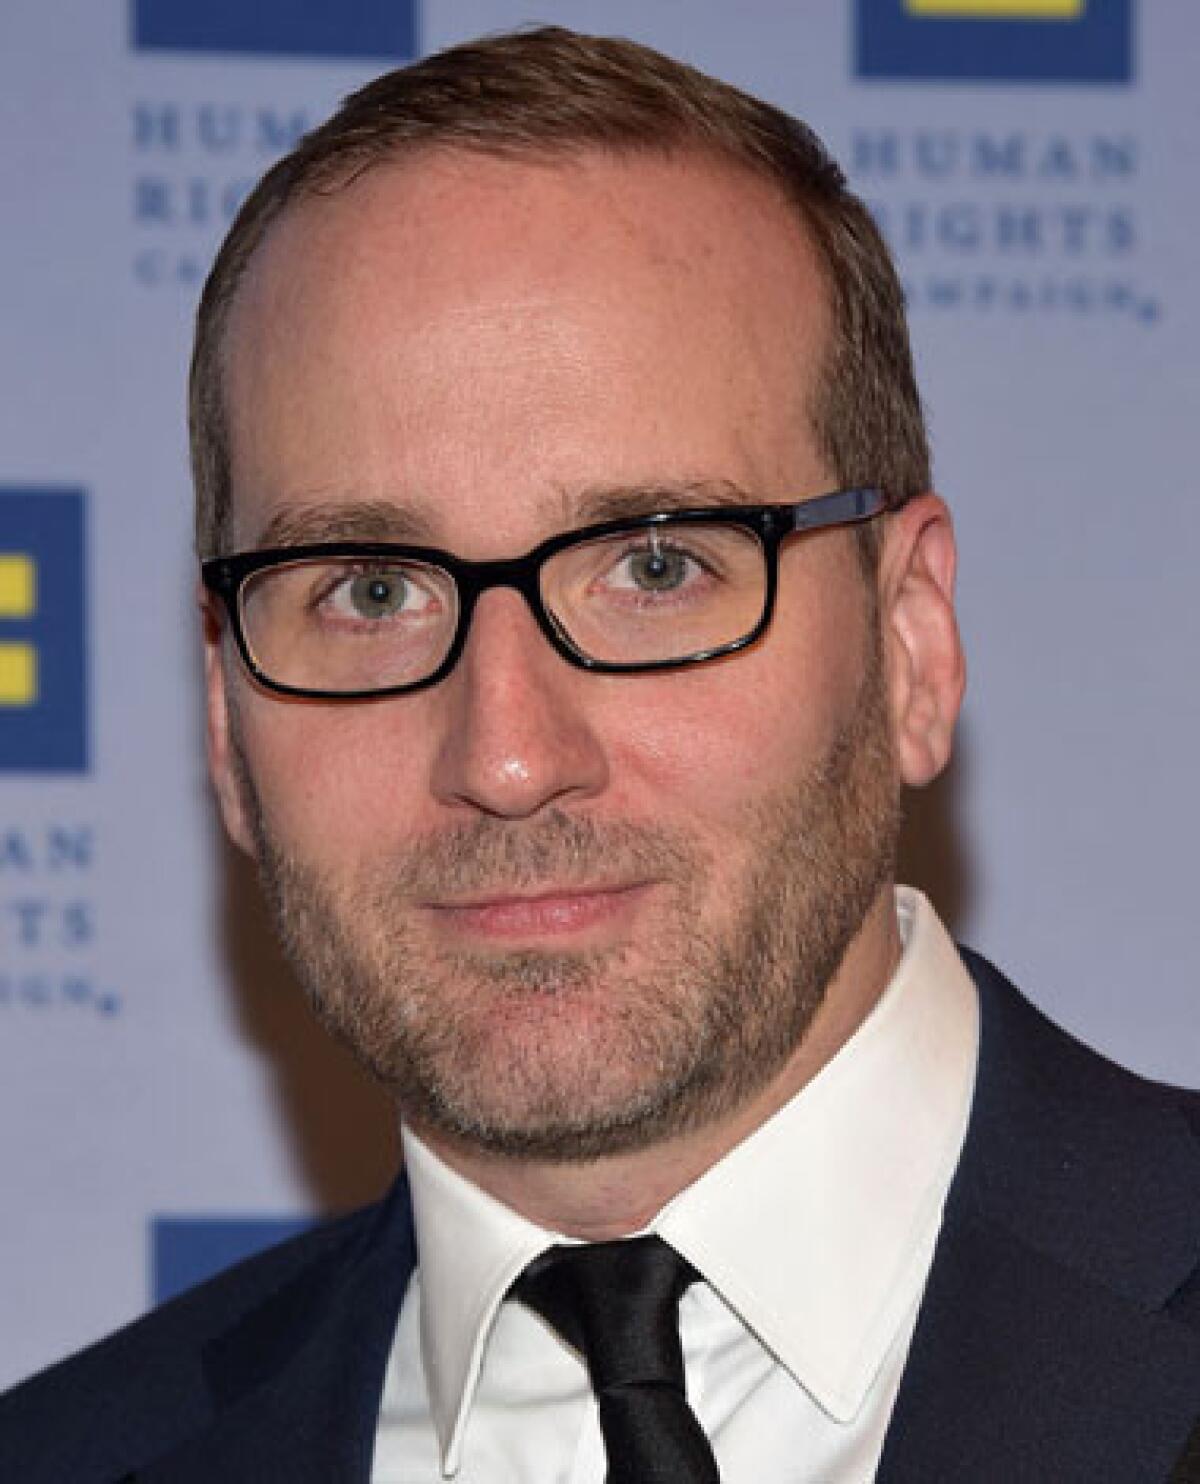 Chad Griffin | President, Human Rights Campaign